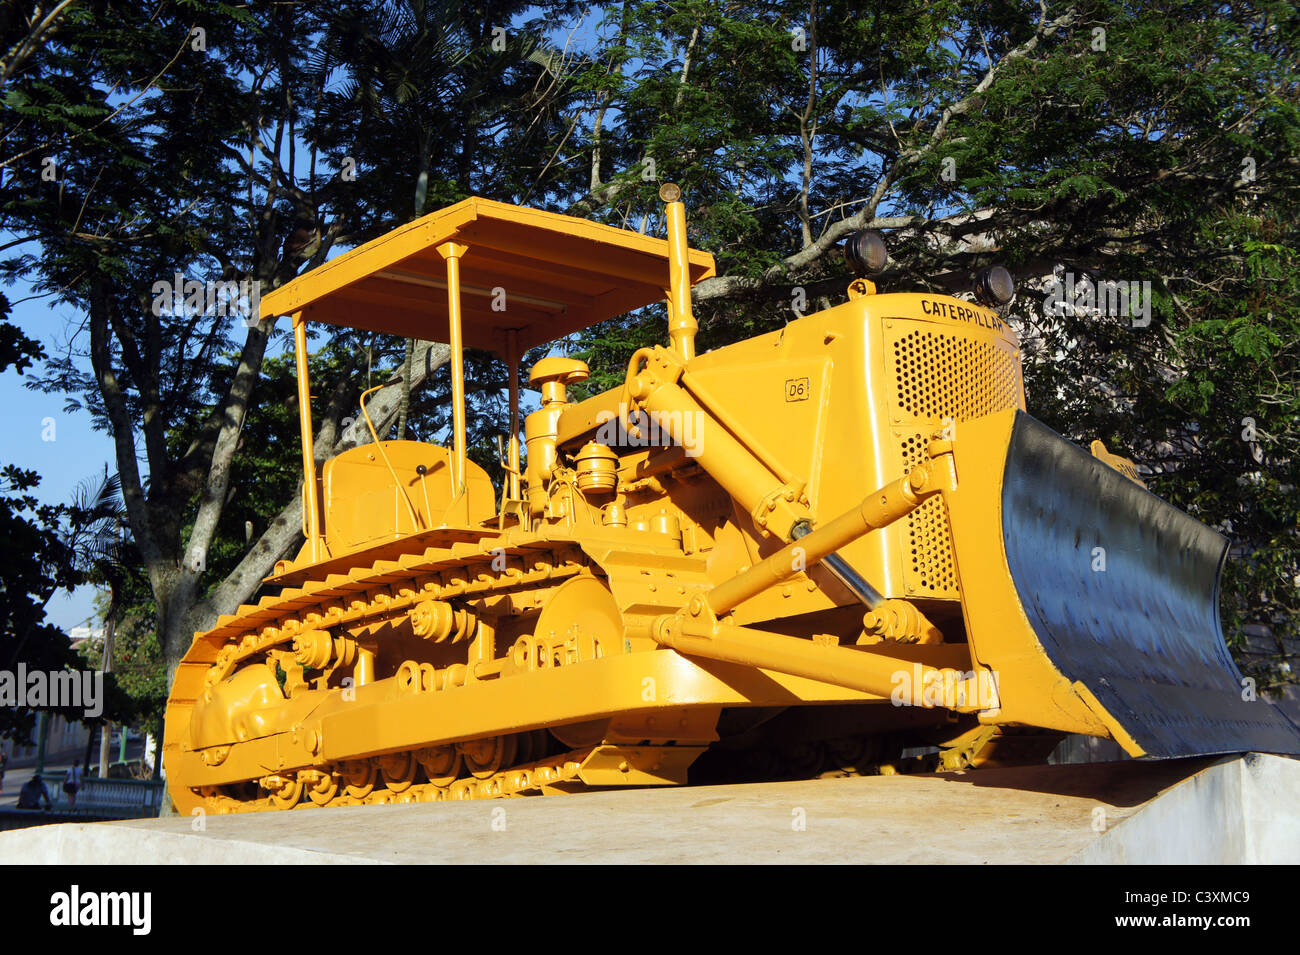 Yellow Caterpillar bulldozer used by Che Guevara to derail an armoured train at battle of Santa Clara in the Cuban revolution. Stock Photo